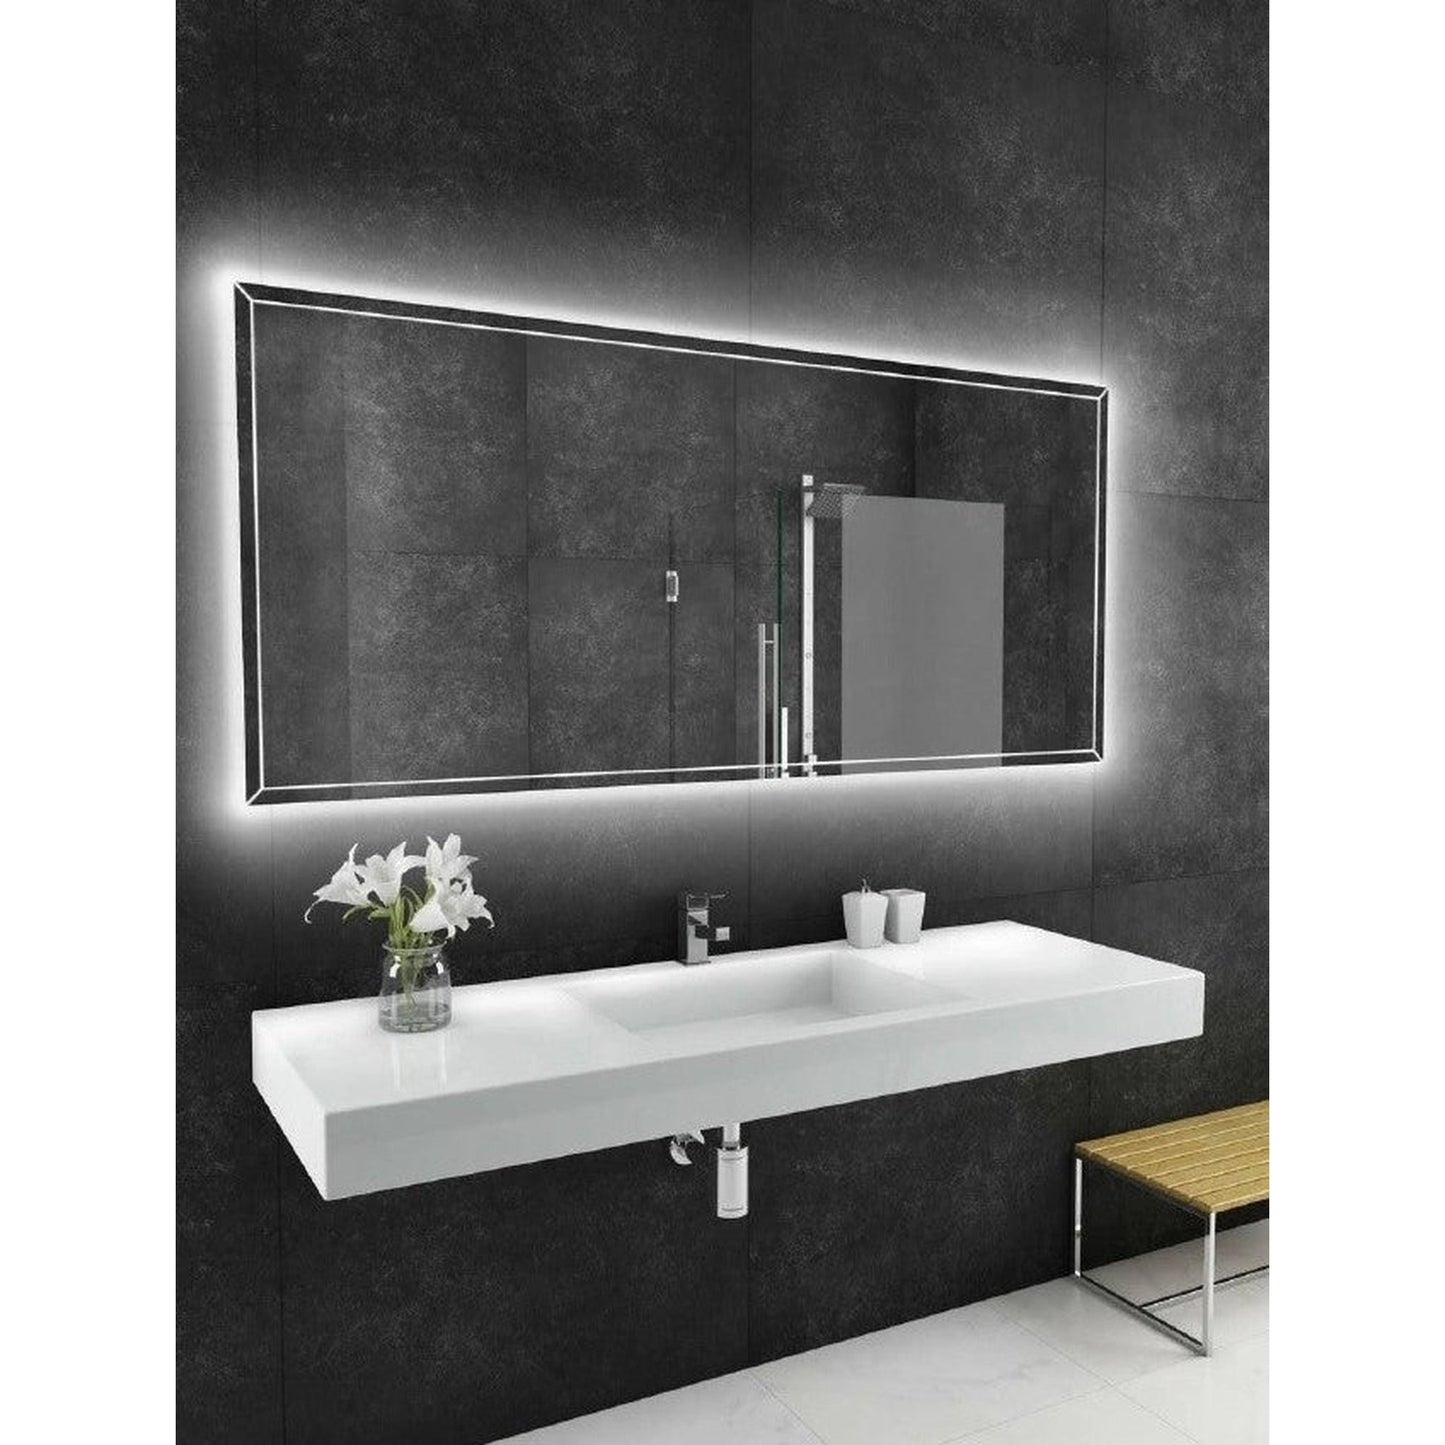 Paris Mirror Athena 70" x 32" Dual-Lighted Super Bright Dimmable Wall-Mounted 3000K LED Mirror With Beveled Acrylic Frosted Edges